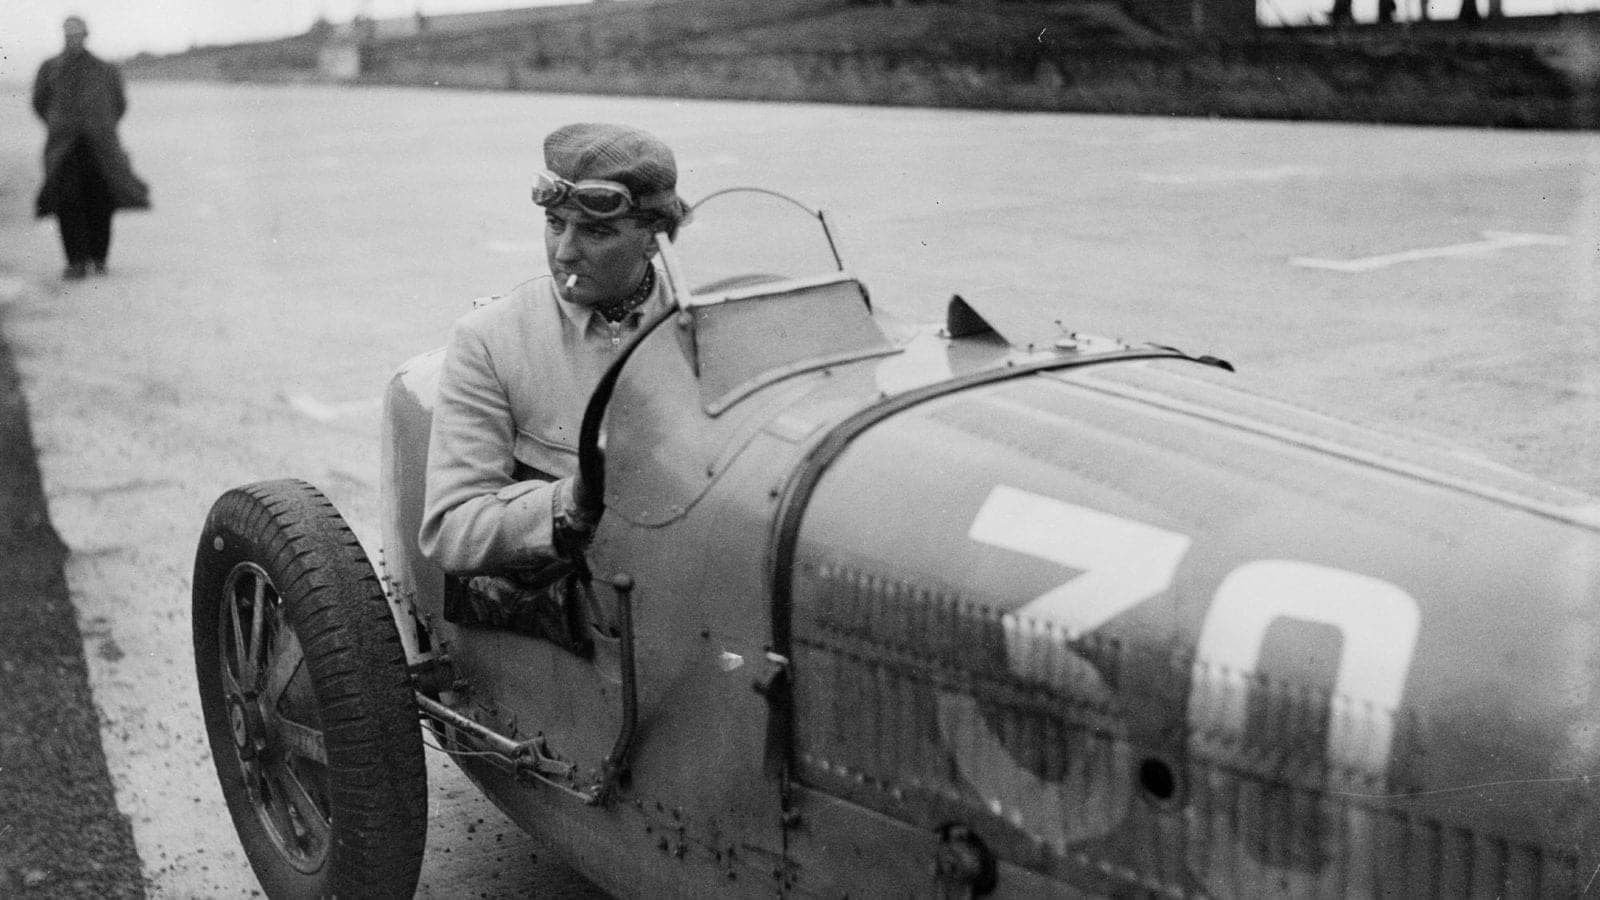 GERMANY - DECEMBER 05: Photograph by Zoltan Glass. British Grand Prix racing driver Charles Frederick William Grover-Williams was known as